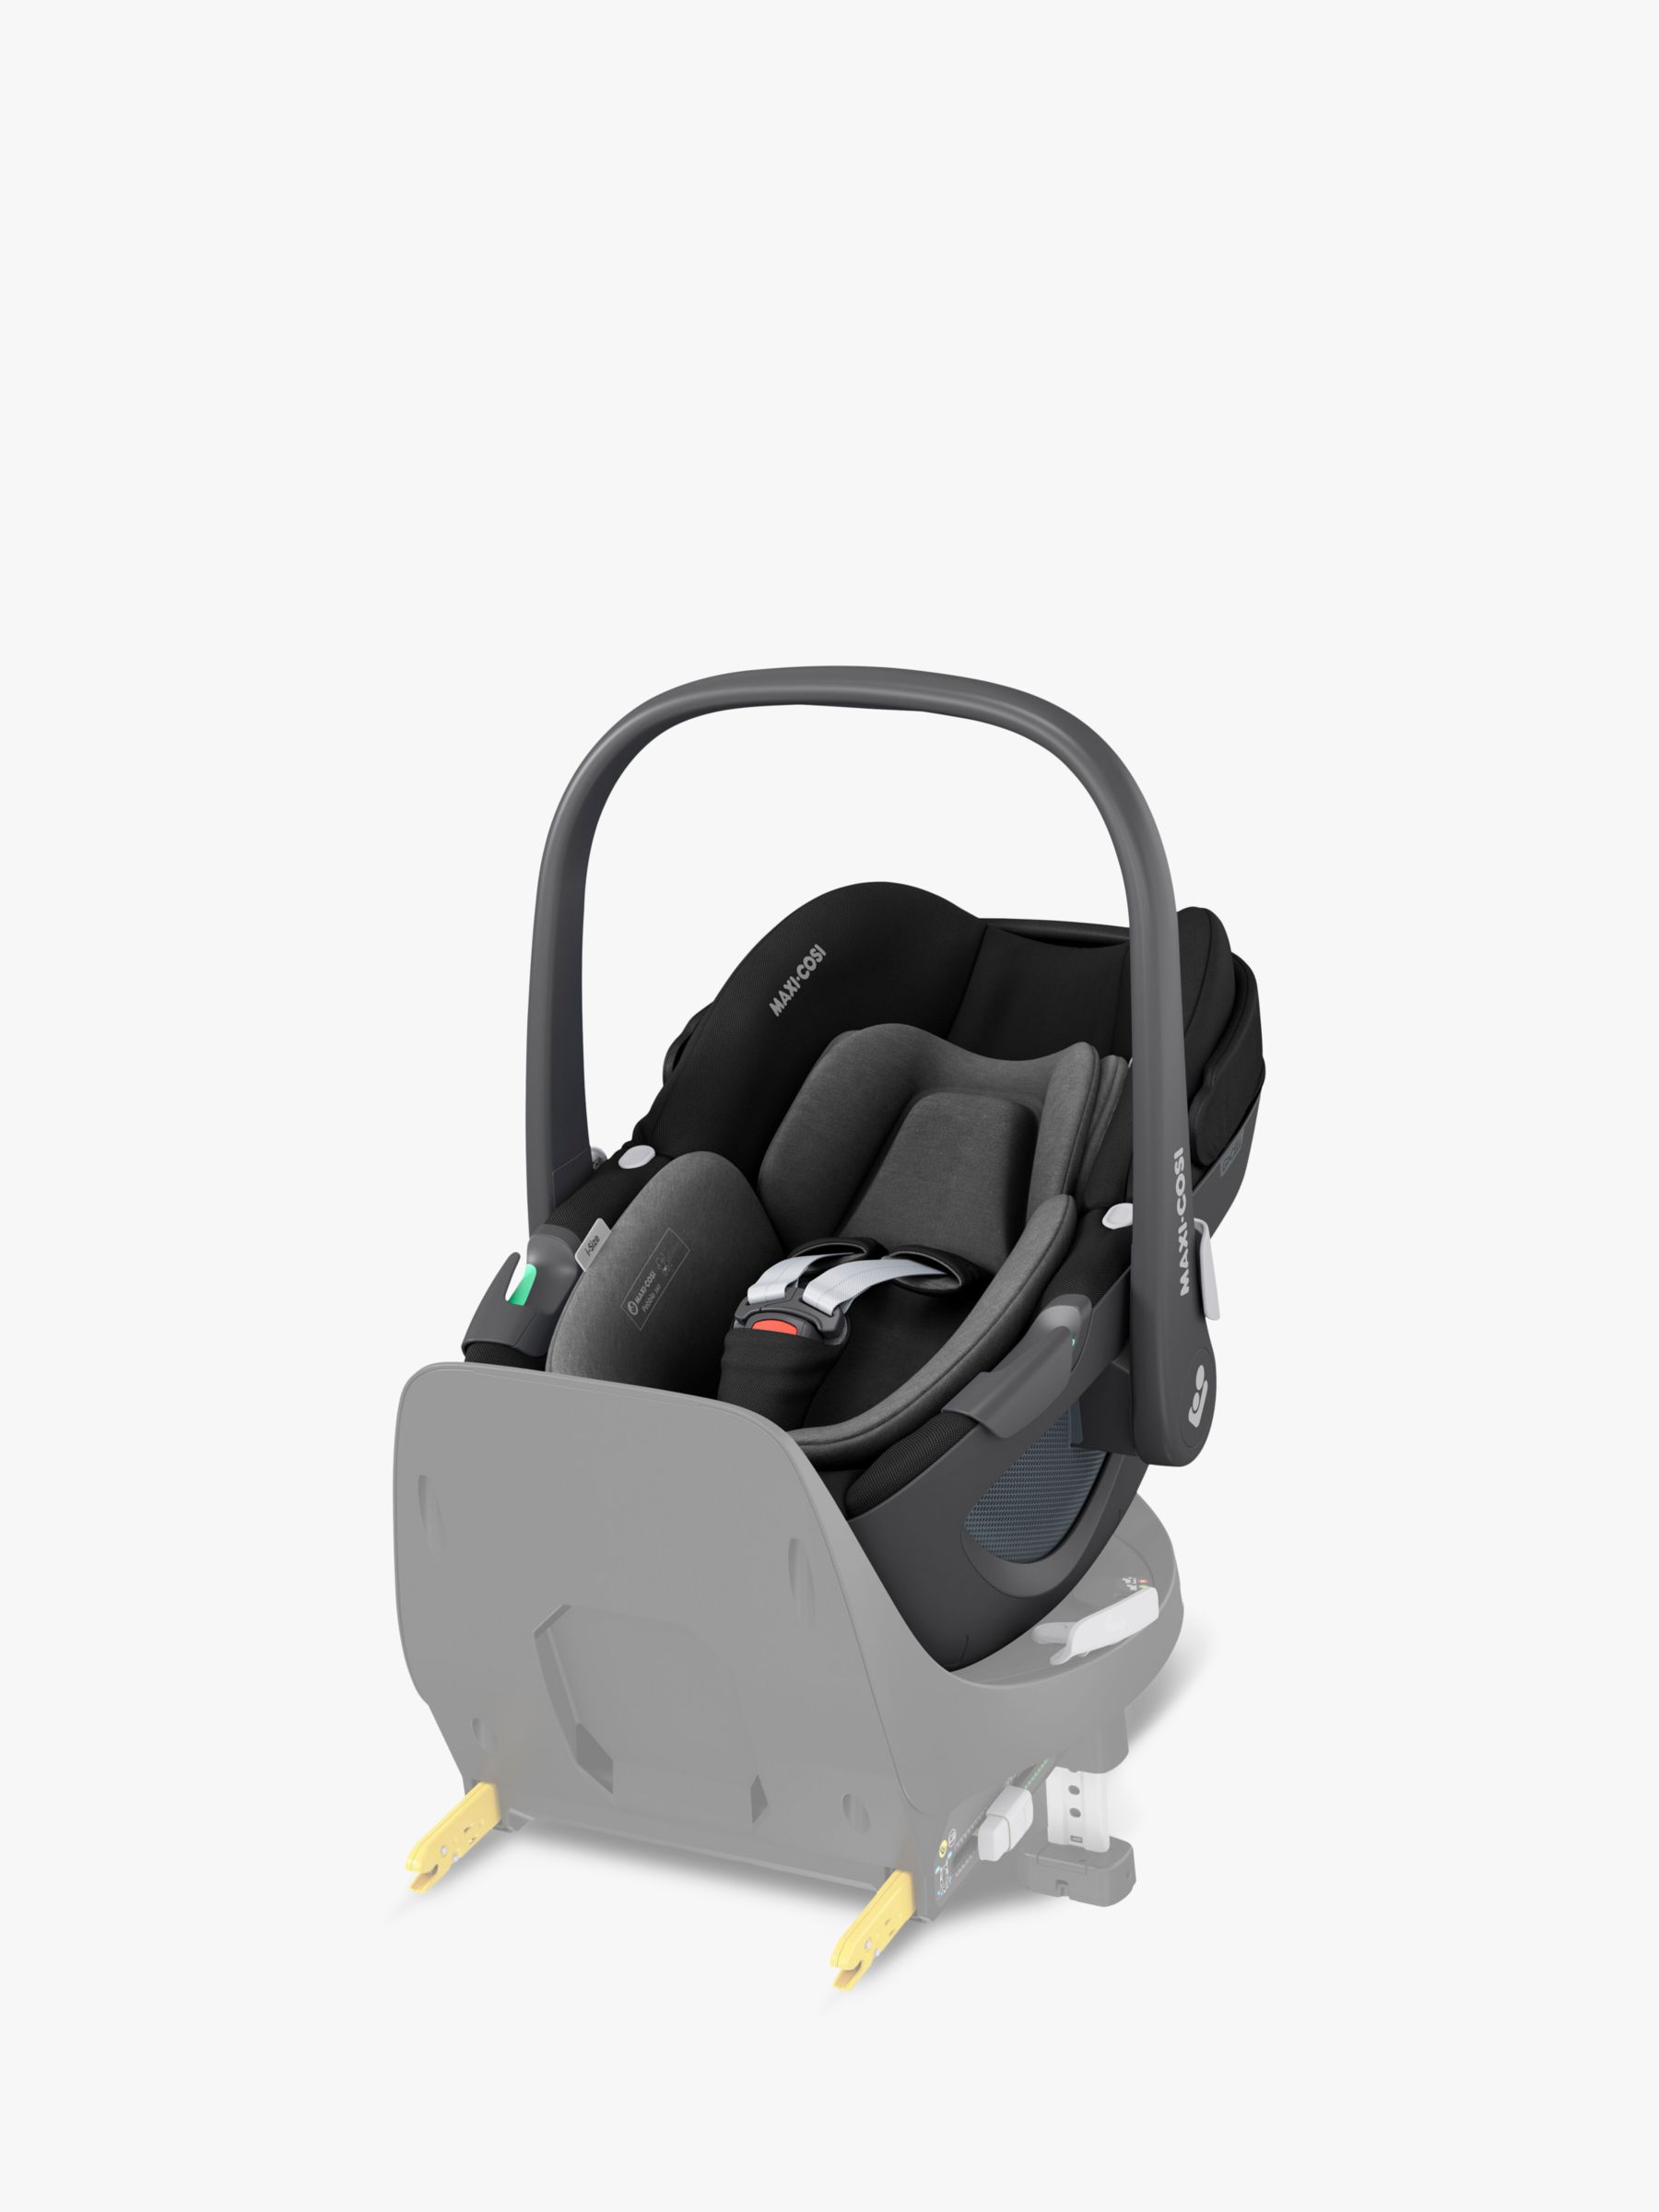 Ananiver gewicht Conceit Maxi-Cosi Pebble 360 i-Size Baby Car Seat